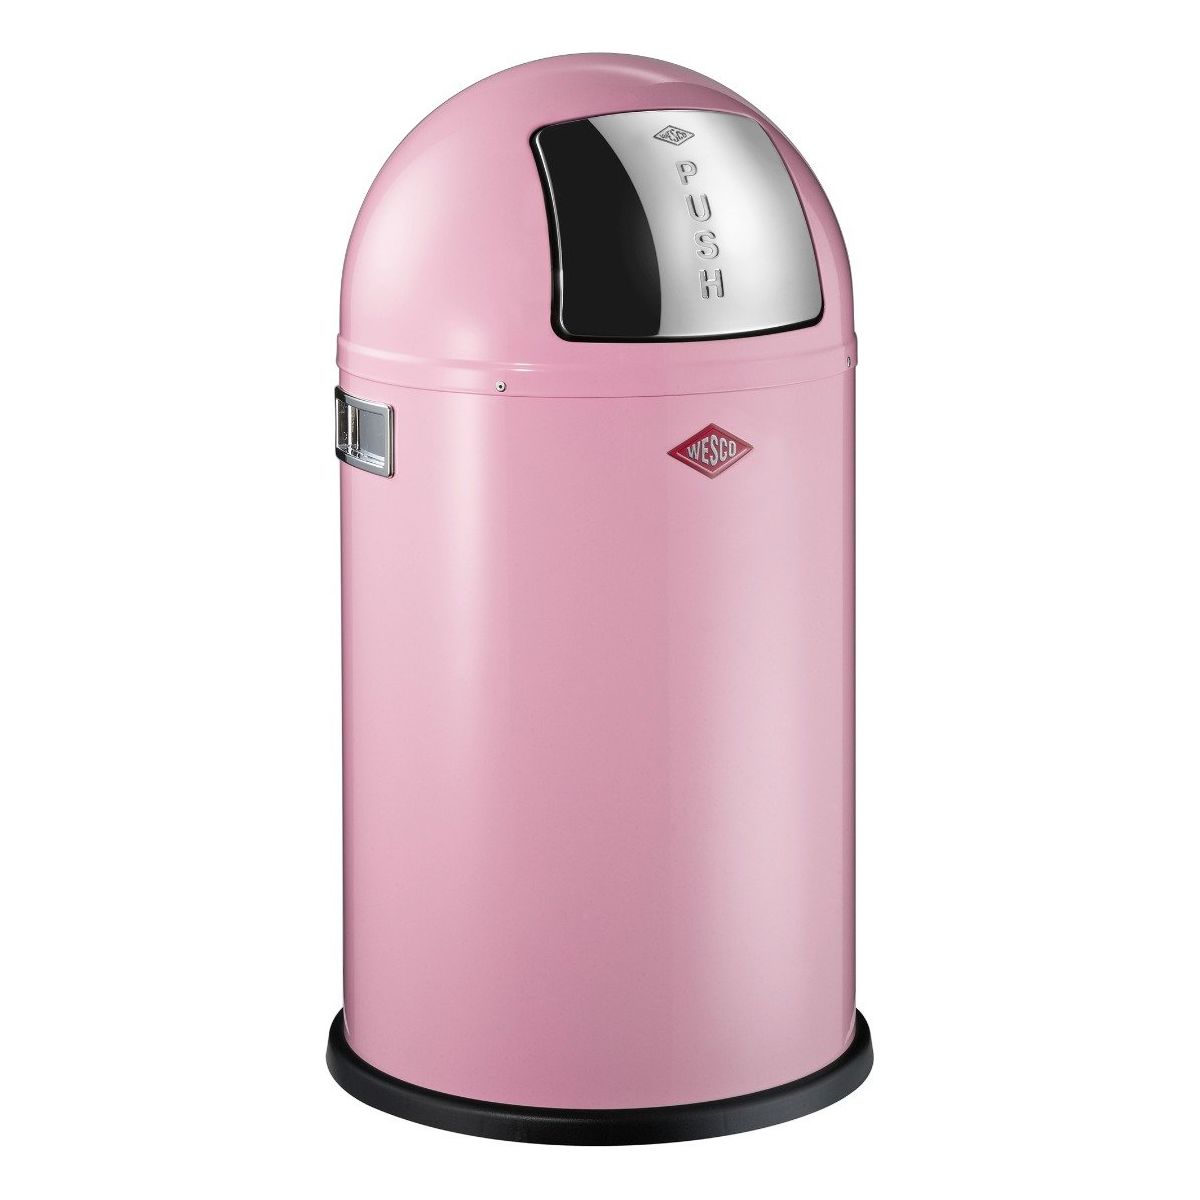 Wesco Pushboy Junior Single Compartment 22 Litre Kitchen Bin in Pink: 175531-26